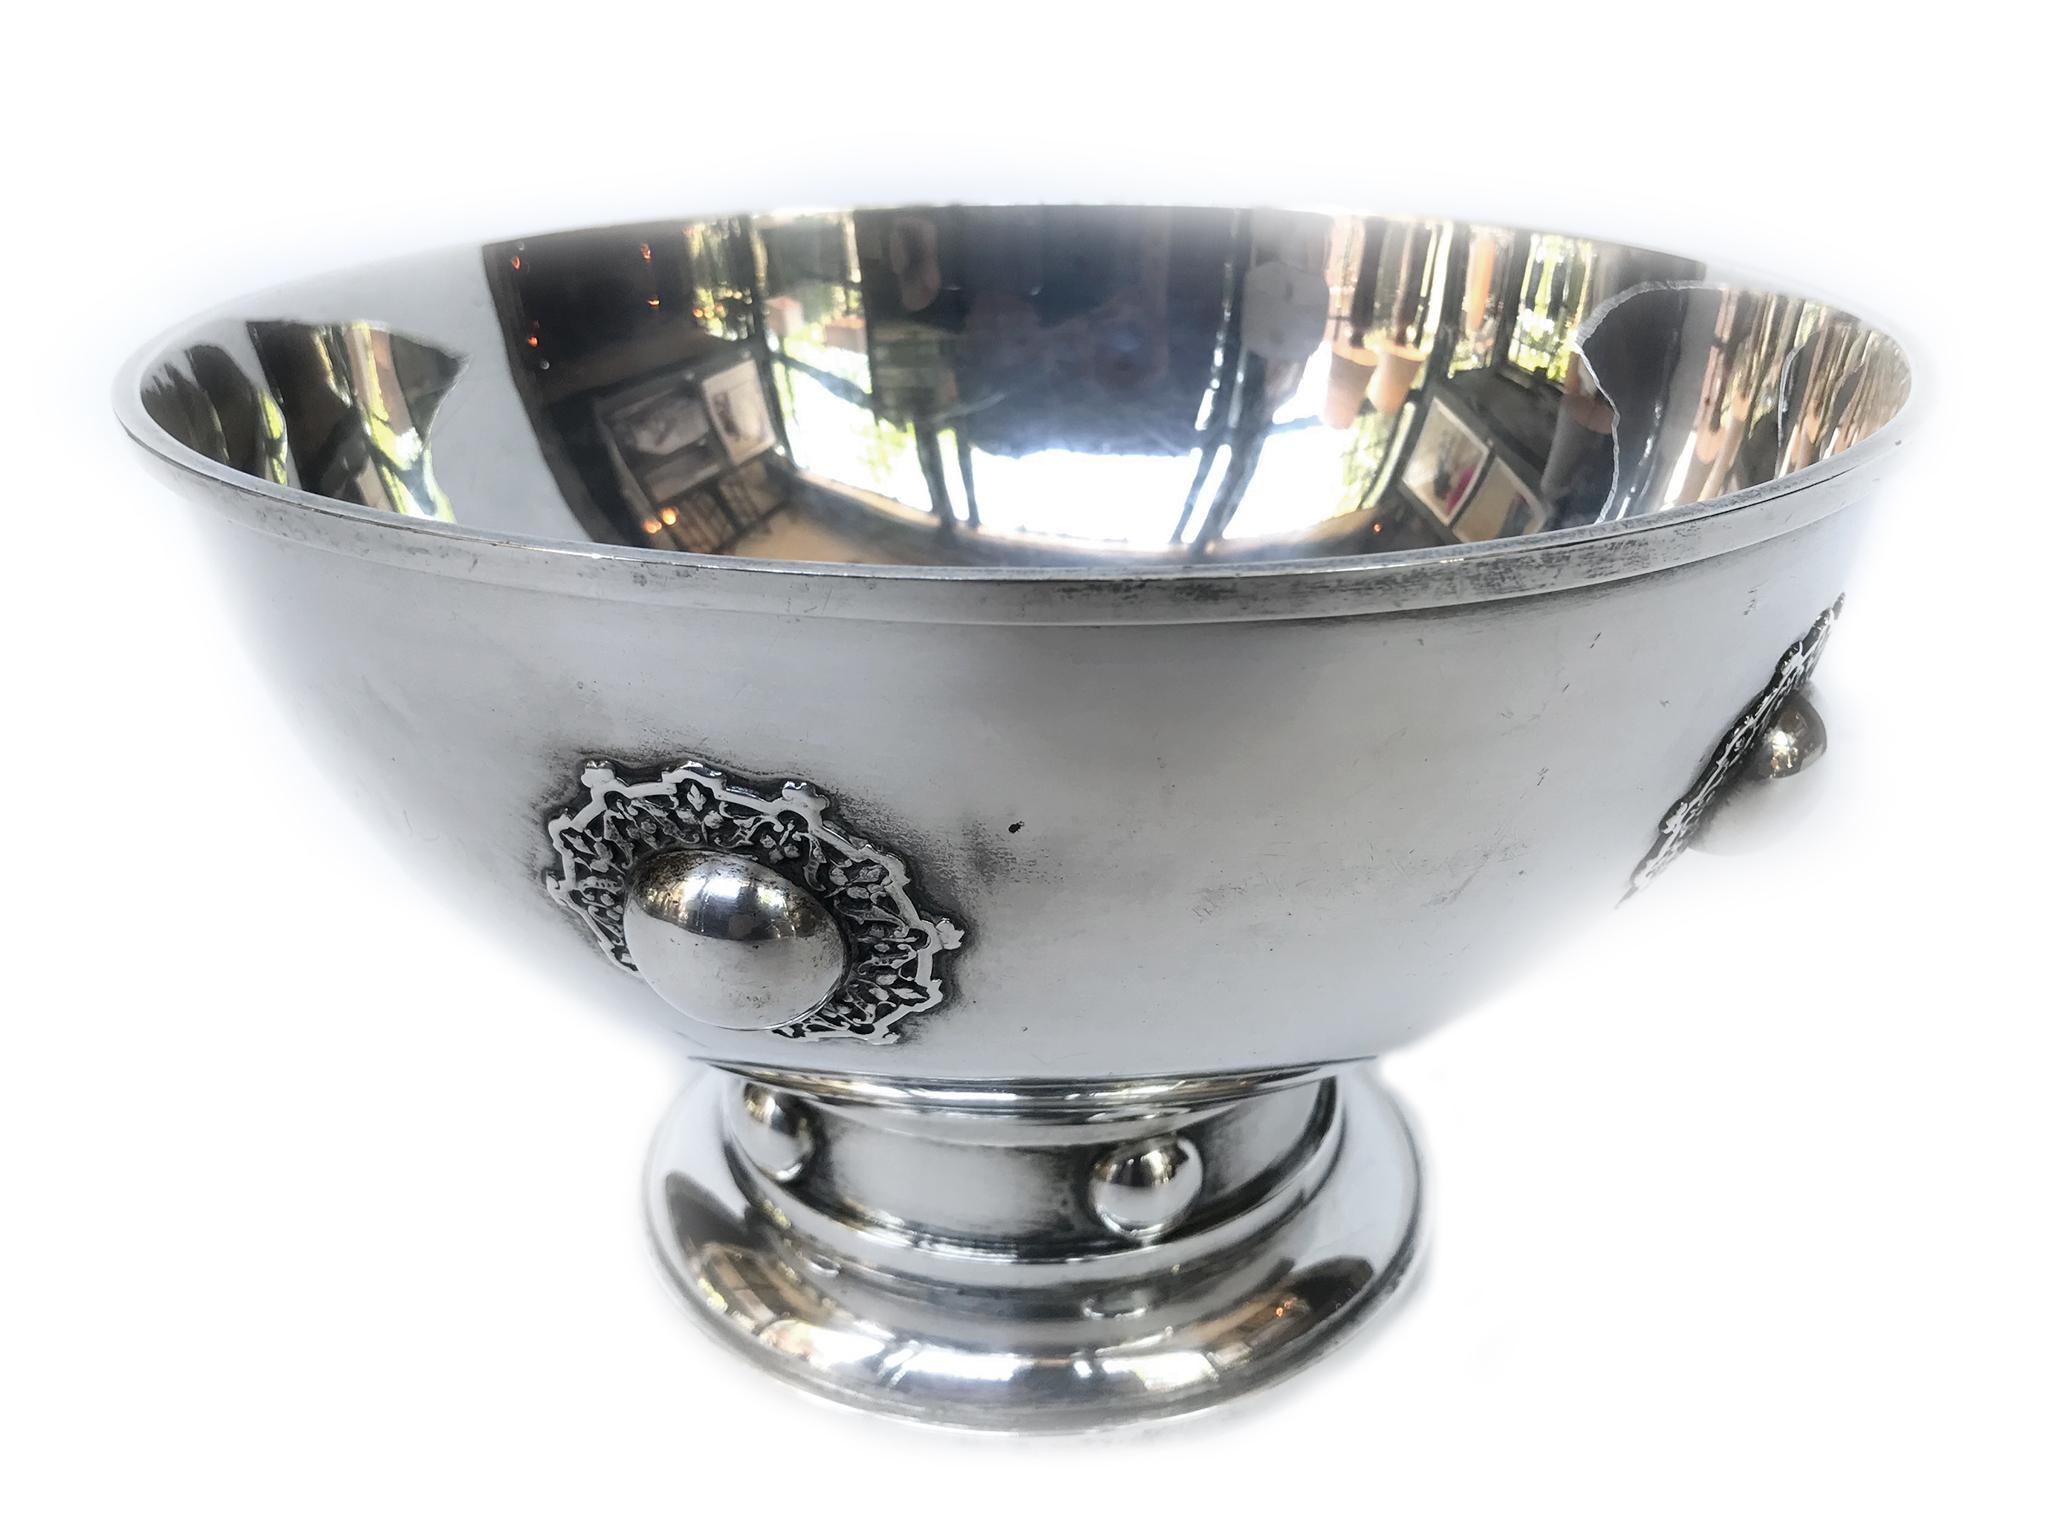 1920s sterling silver bowl designed by O.R. Dunn for Hawkes Sterling. Its elegant design features medallion studs with floral haloes.

Dimensions:
9 in. diameter
5.5 in height.